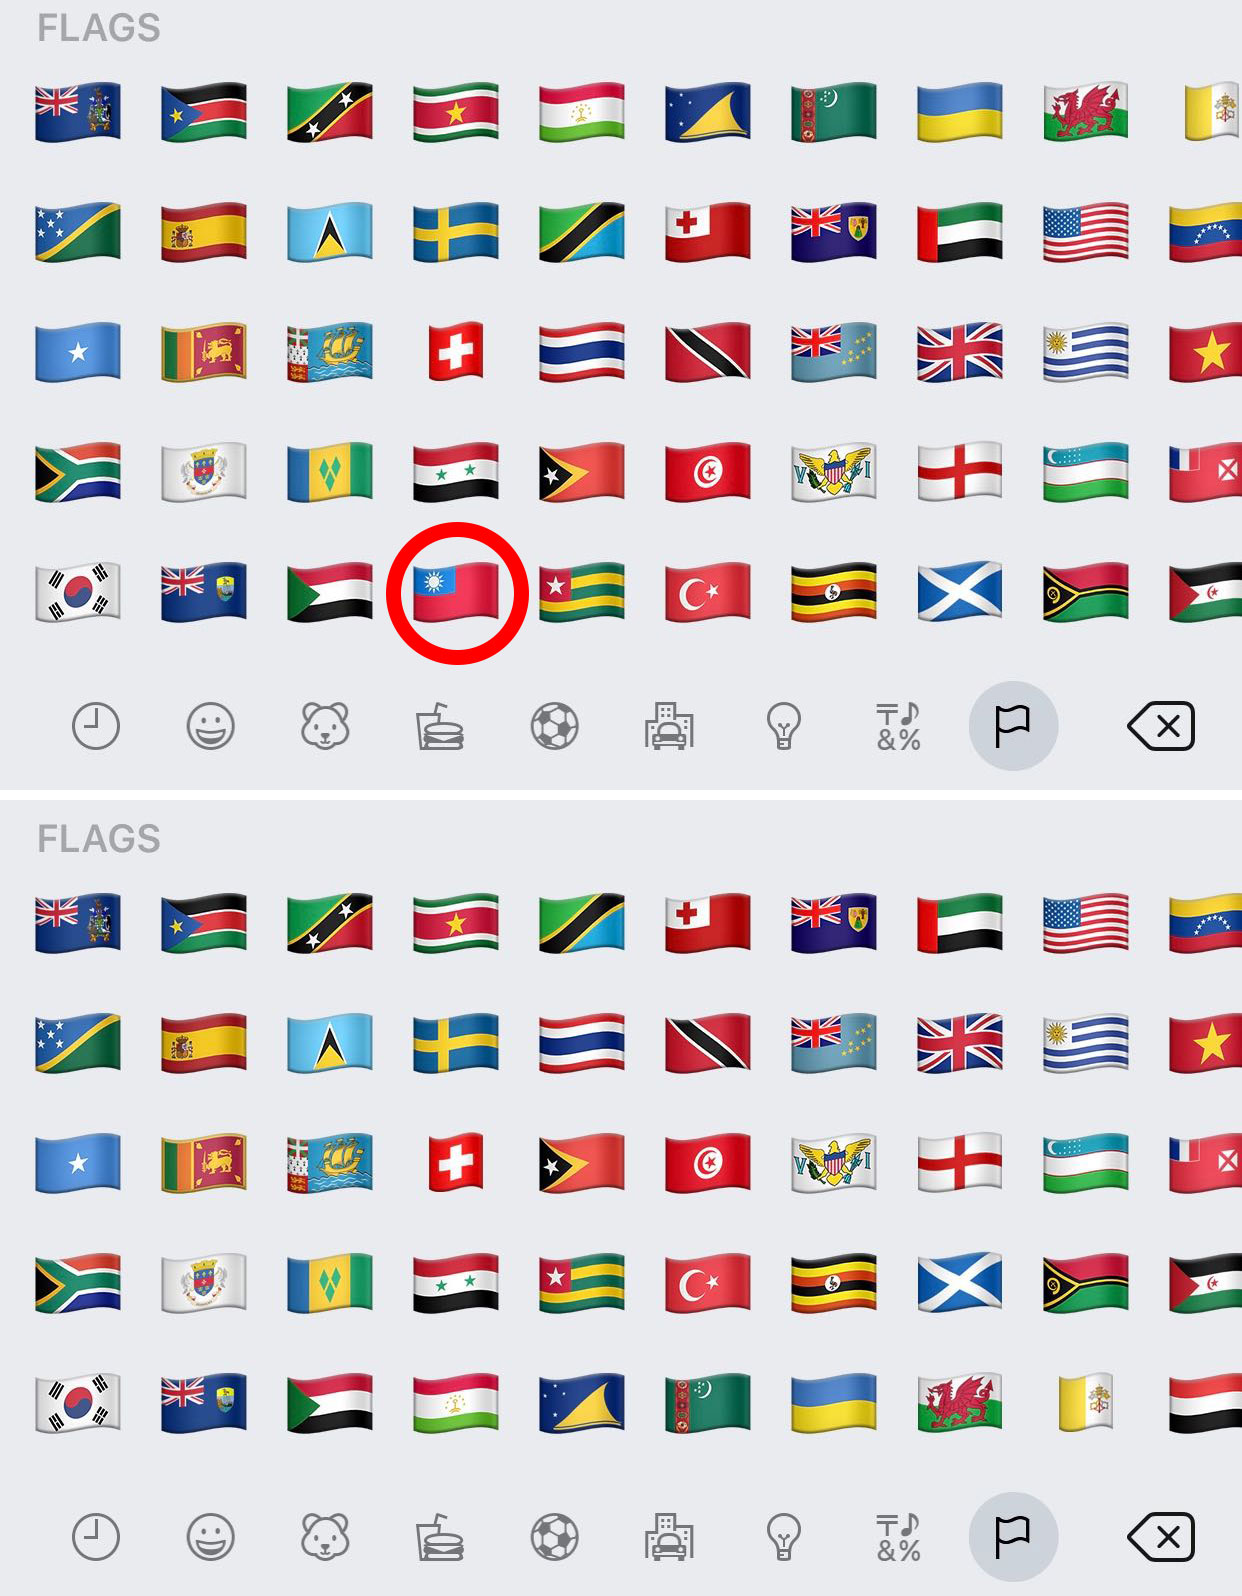 The Taiwanese flag, seen in the U.S. version of iOS, top, is missing in the Hong Kong iOS emoji keyboard, bottom.